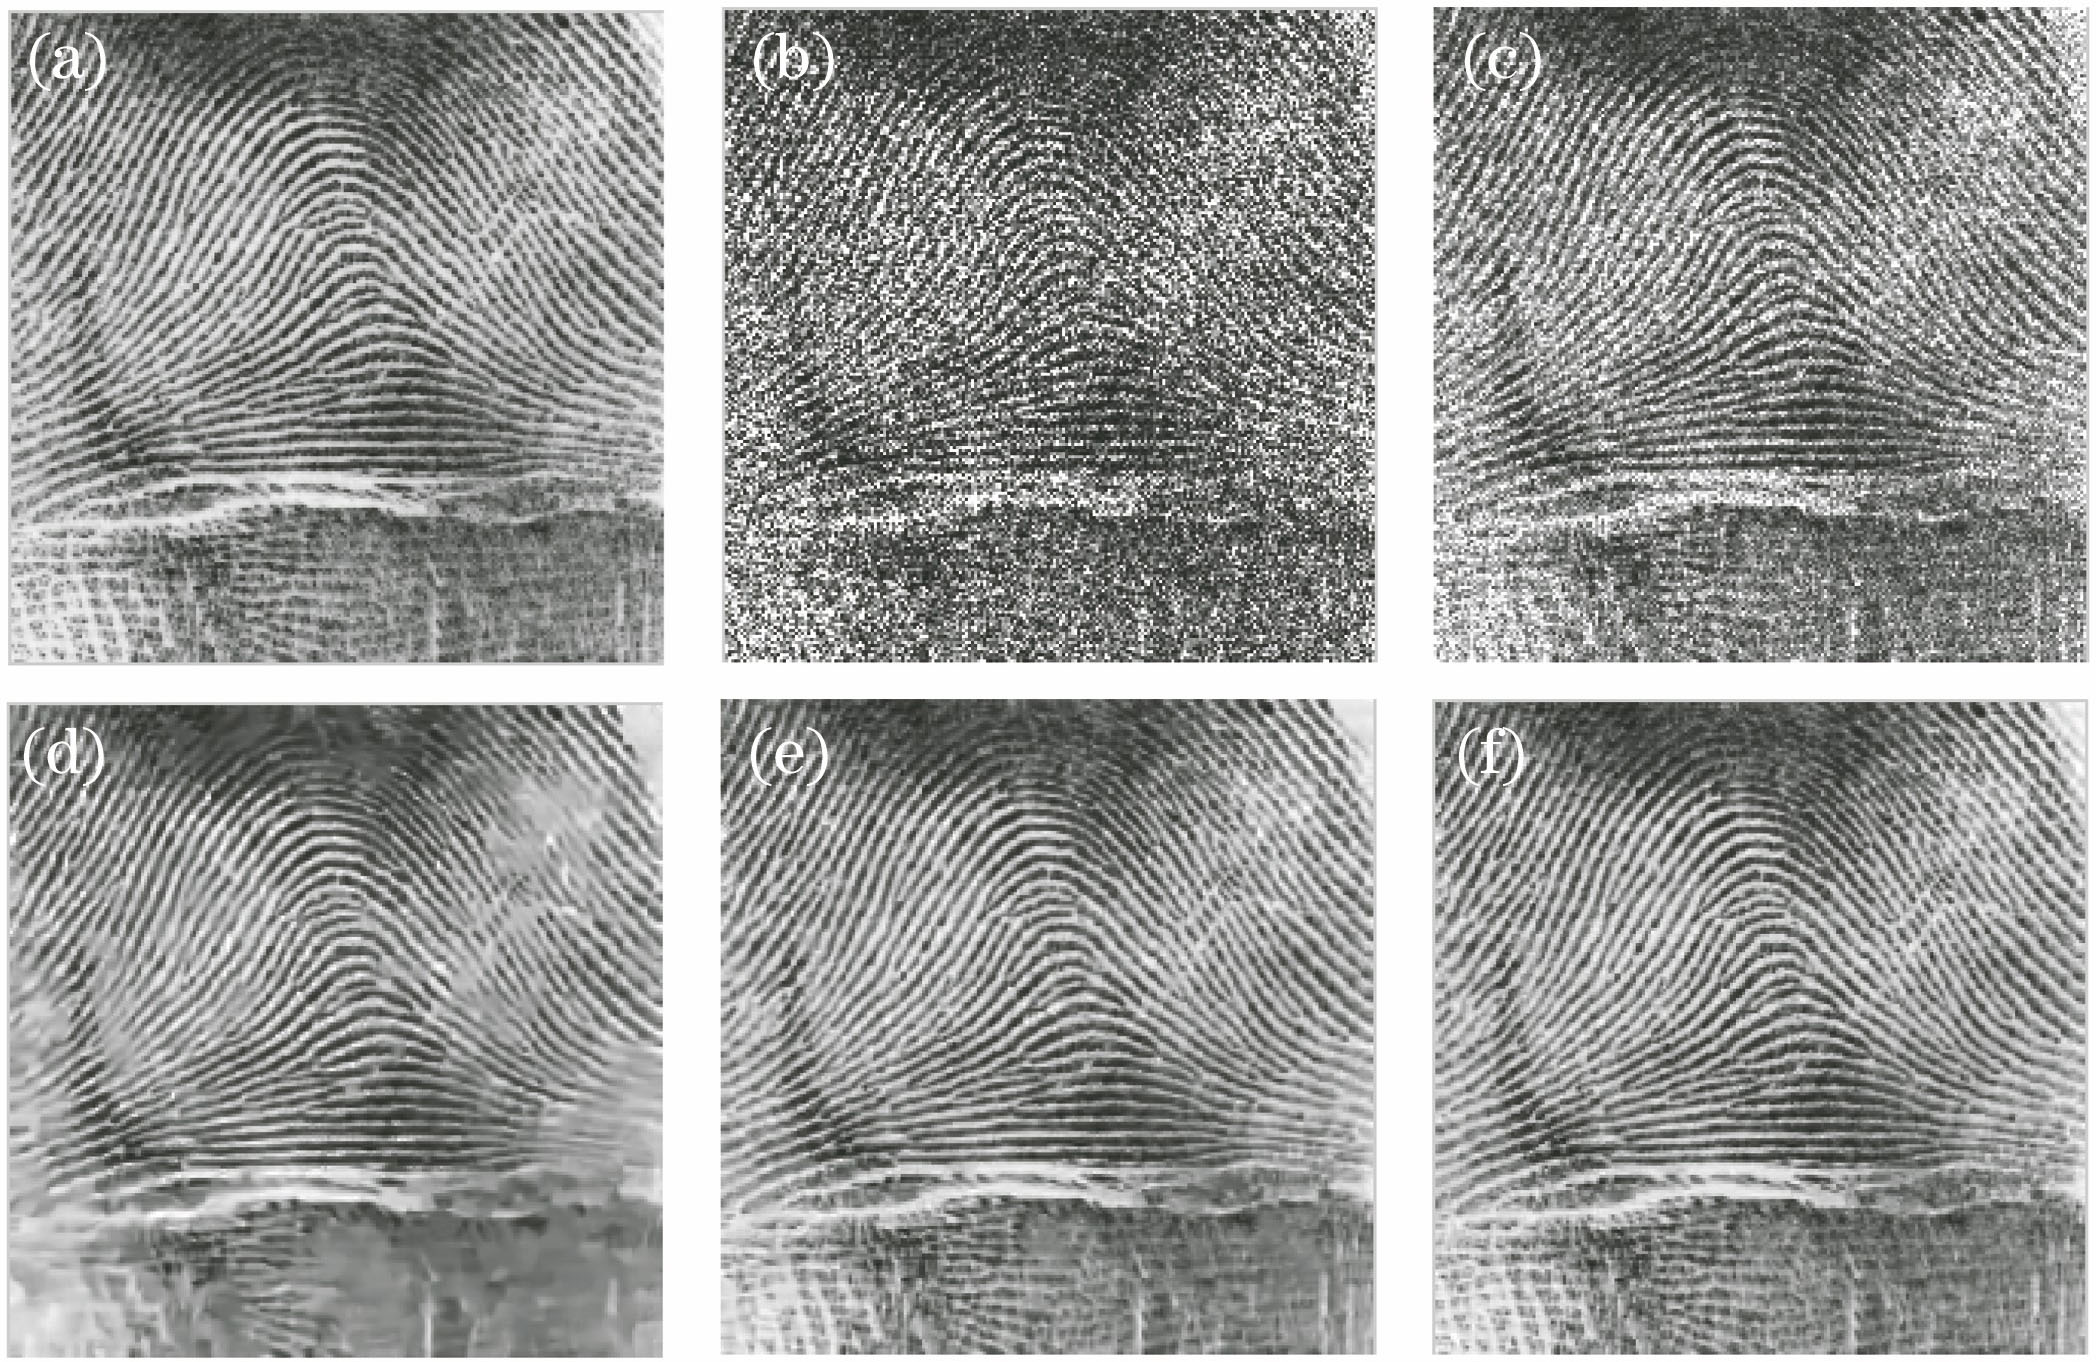 Experimental results of simulated image. (a) Original fingerprint image; (b) noisy image corrupted by two-look speckle; (c) image after filtering with WST; (d) image after filtering with MSAR; (e) image after filtering with NLM; (f) image after filtering with proposed algorithm